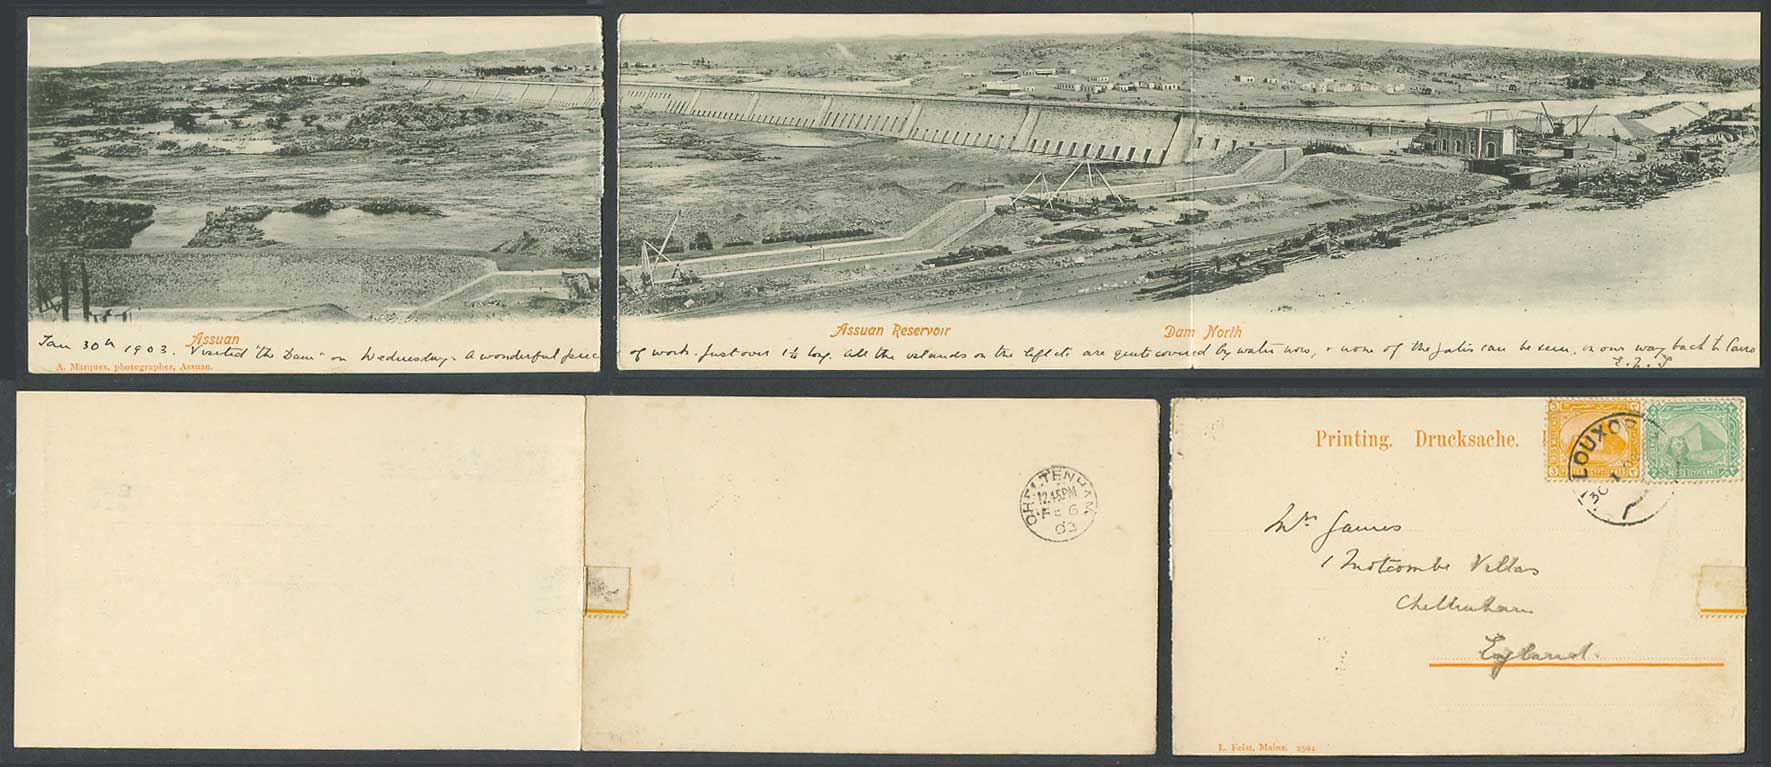 Egypt 3 Old Postcards 2 Attached 1 Panorama View Assuan Reservoir Dam North 1903